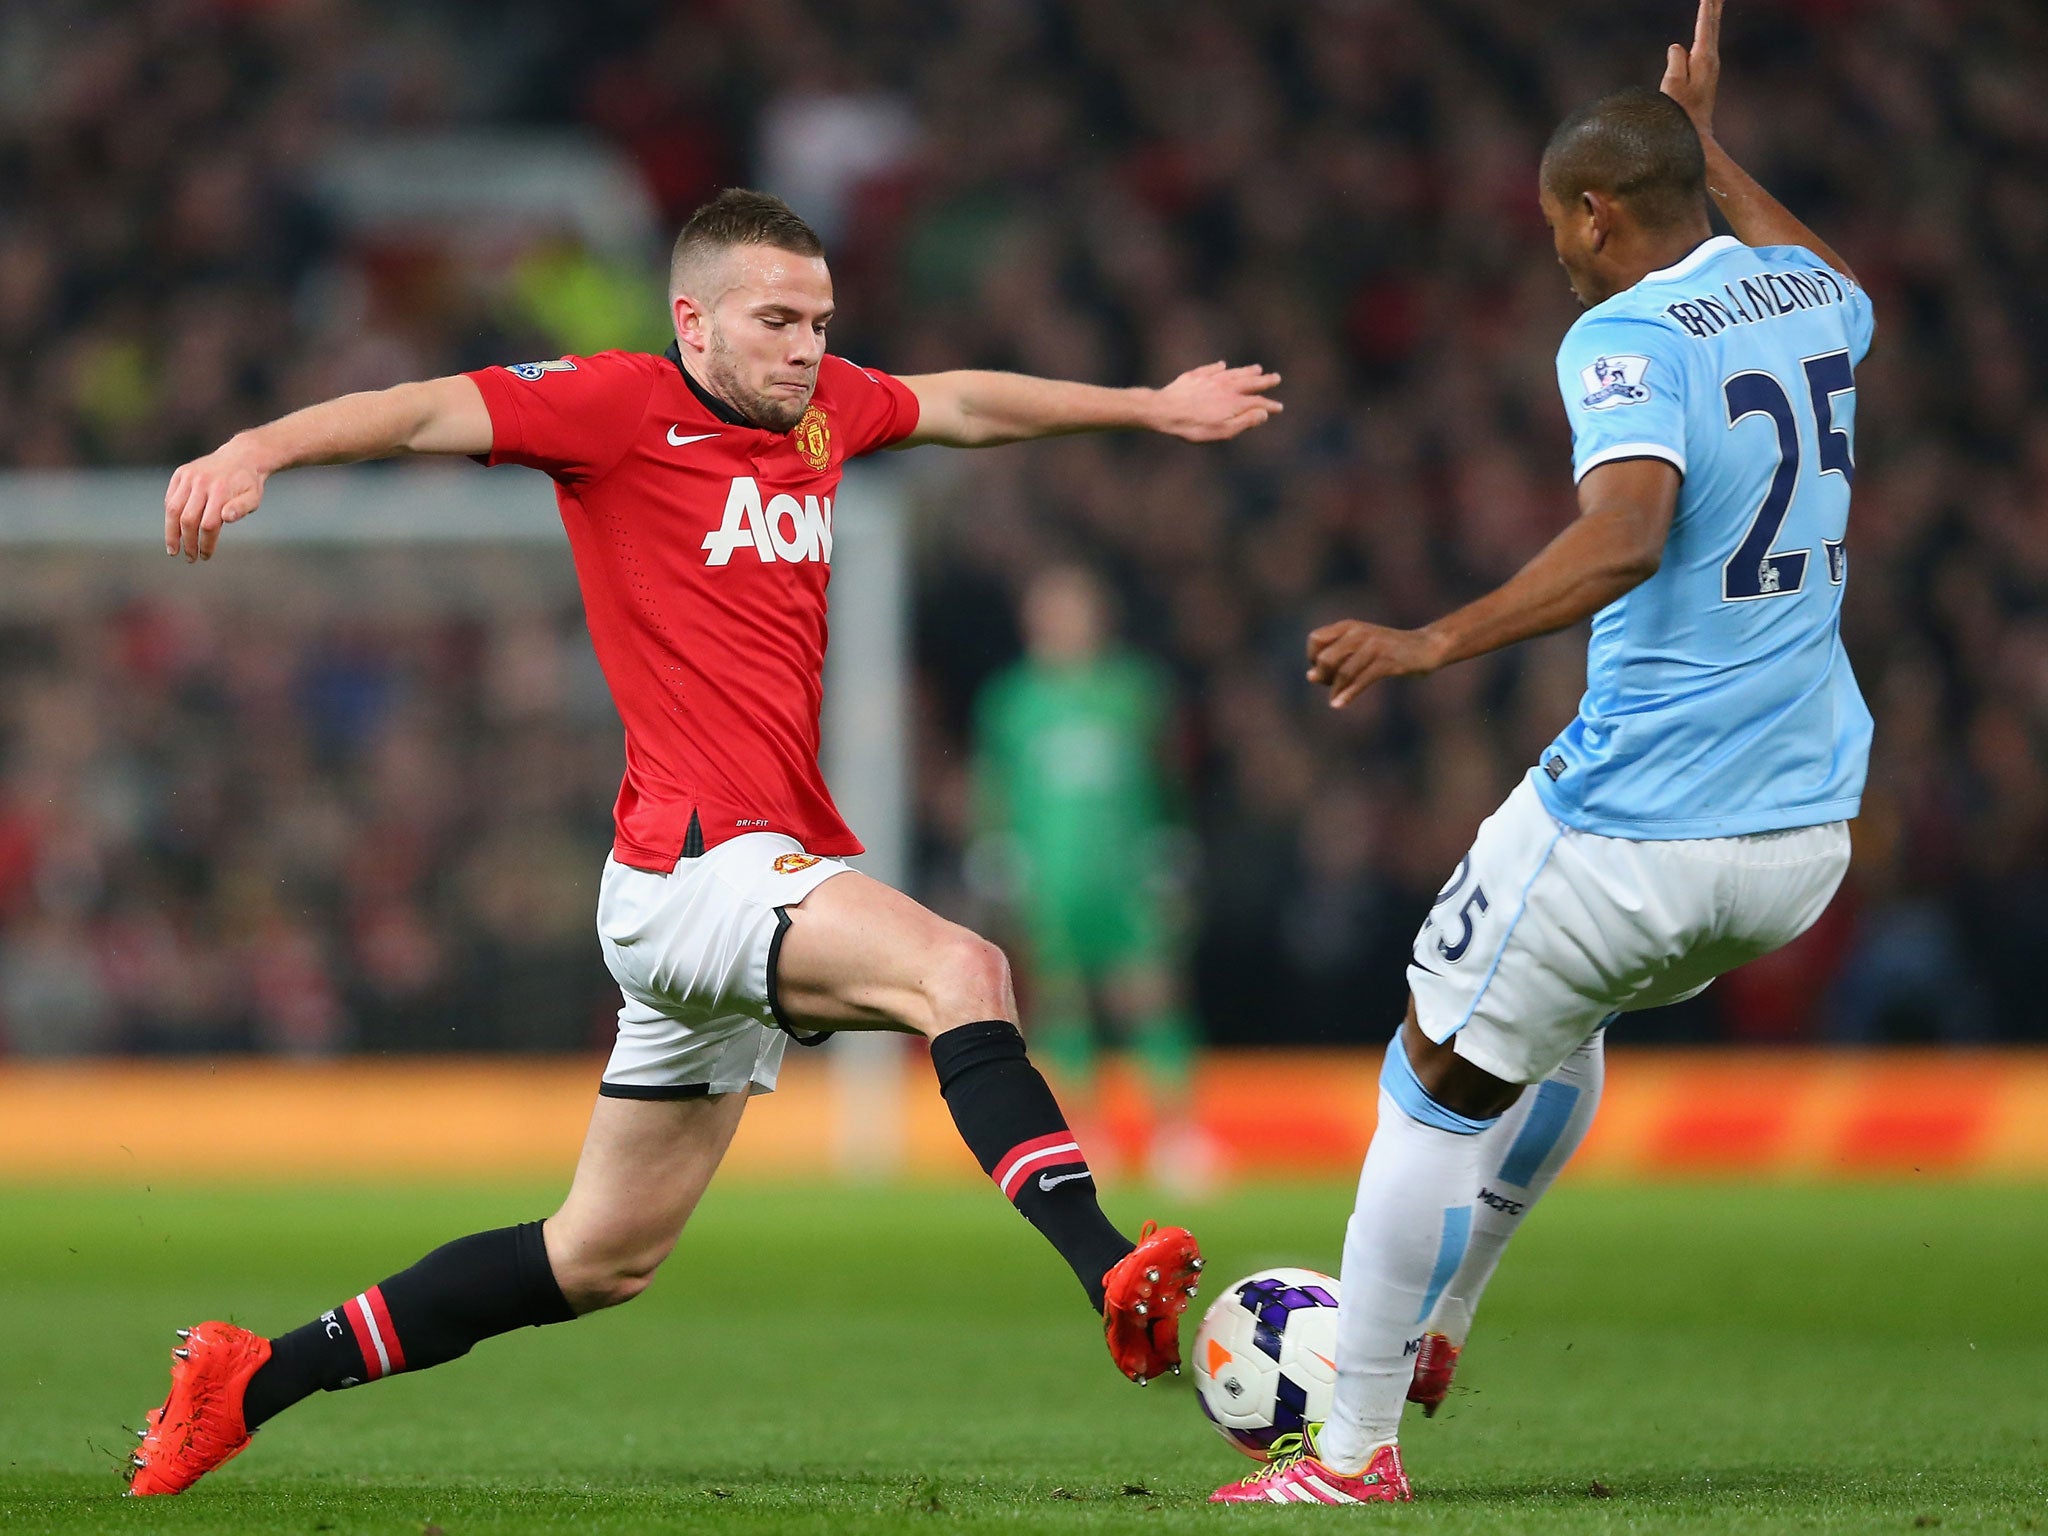 Tom Cleverley (left) competes for the ball with Fernandinho